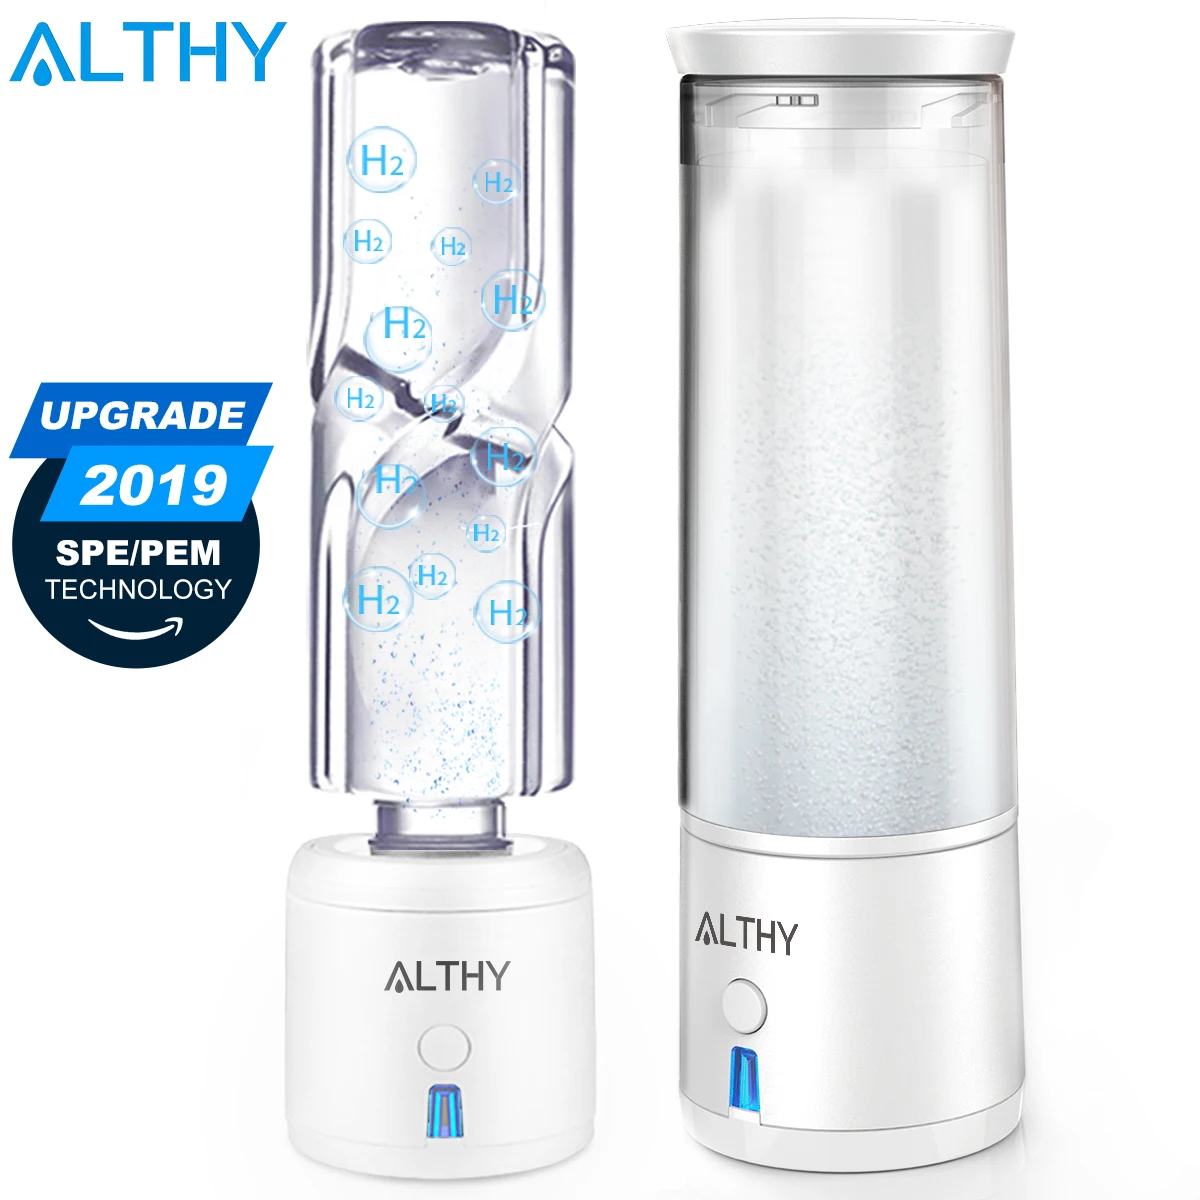 

ALTHY SPE PEM Hydrogen Rich Water Generator Bottle lonizer H2 Maker Electrolysis Cup Anti-Aging Portable USB Rechargeable